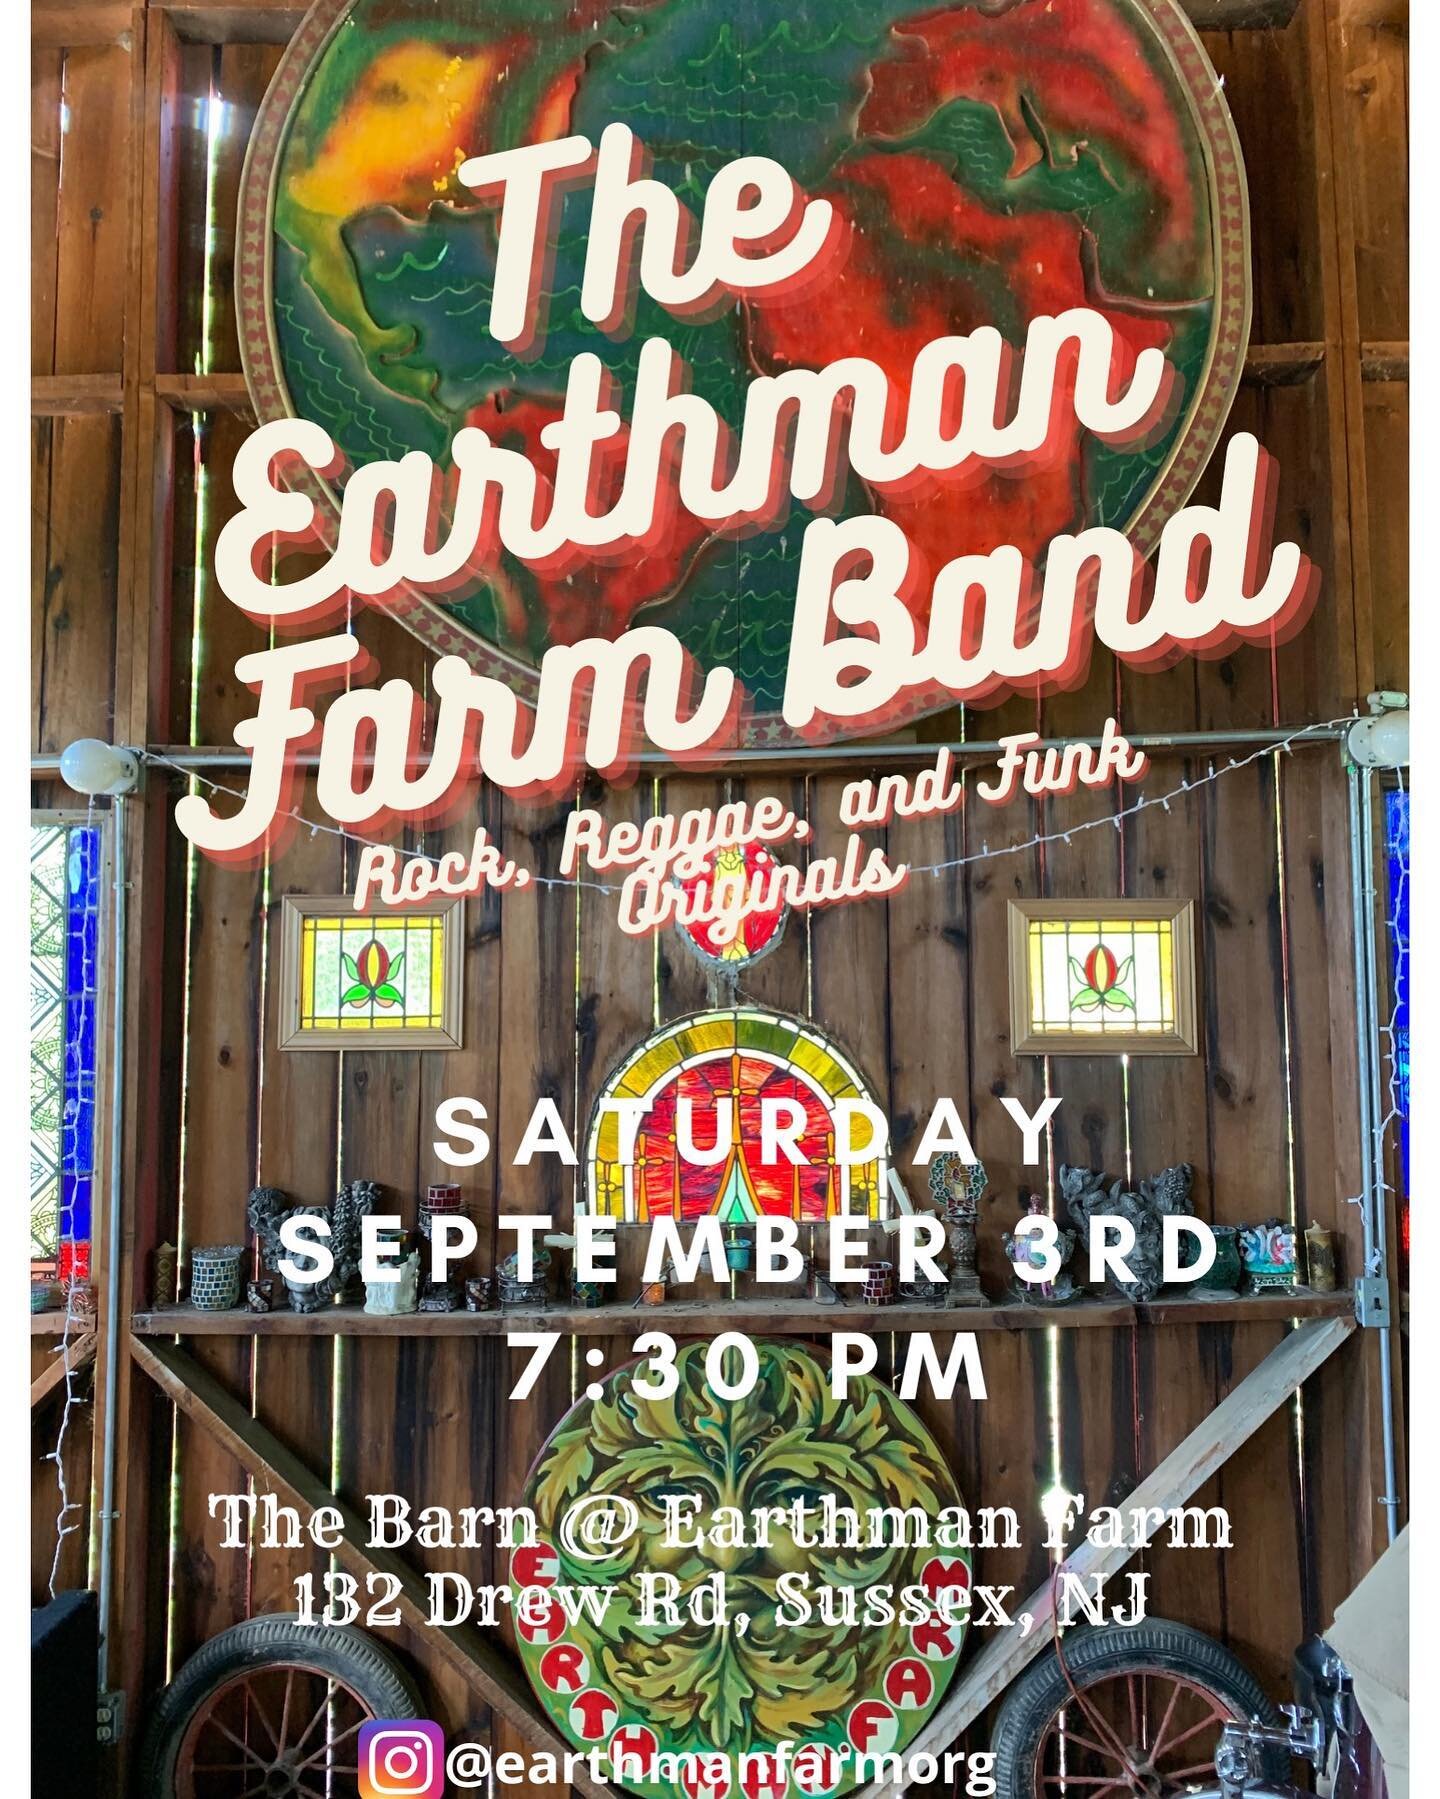 This Saturday we have the Earthman Farm Band! Rock, reggae, funk, blues, and plenty of jammin&rsquo;! Come on out! 🎶🎸🍻